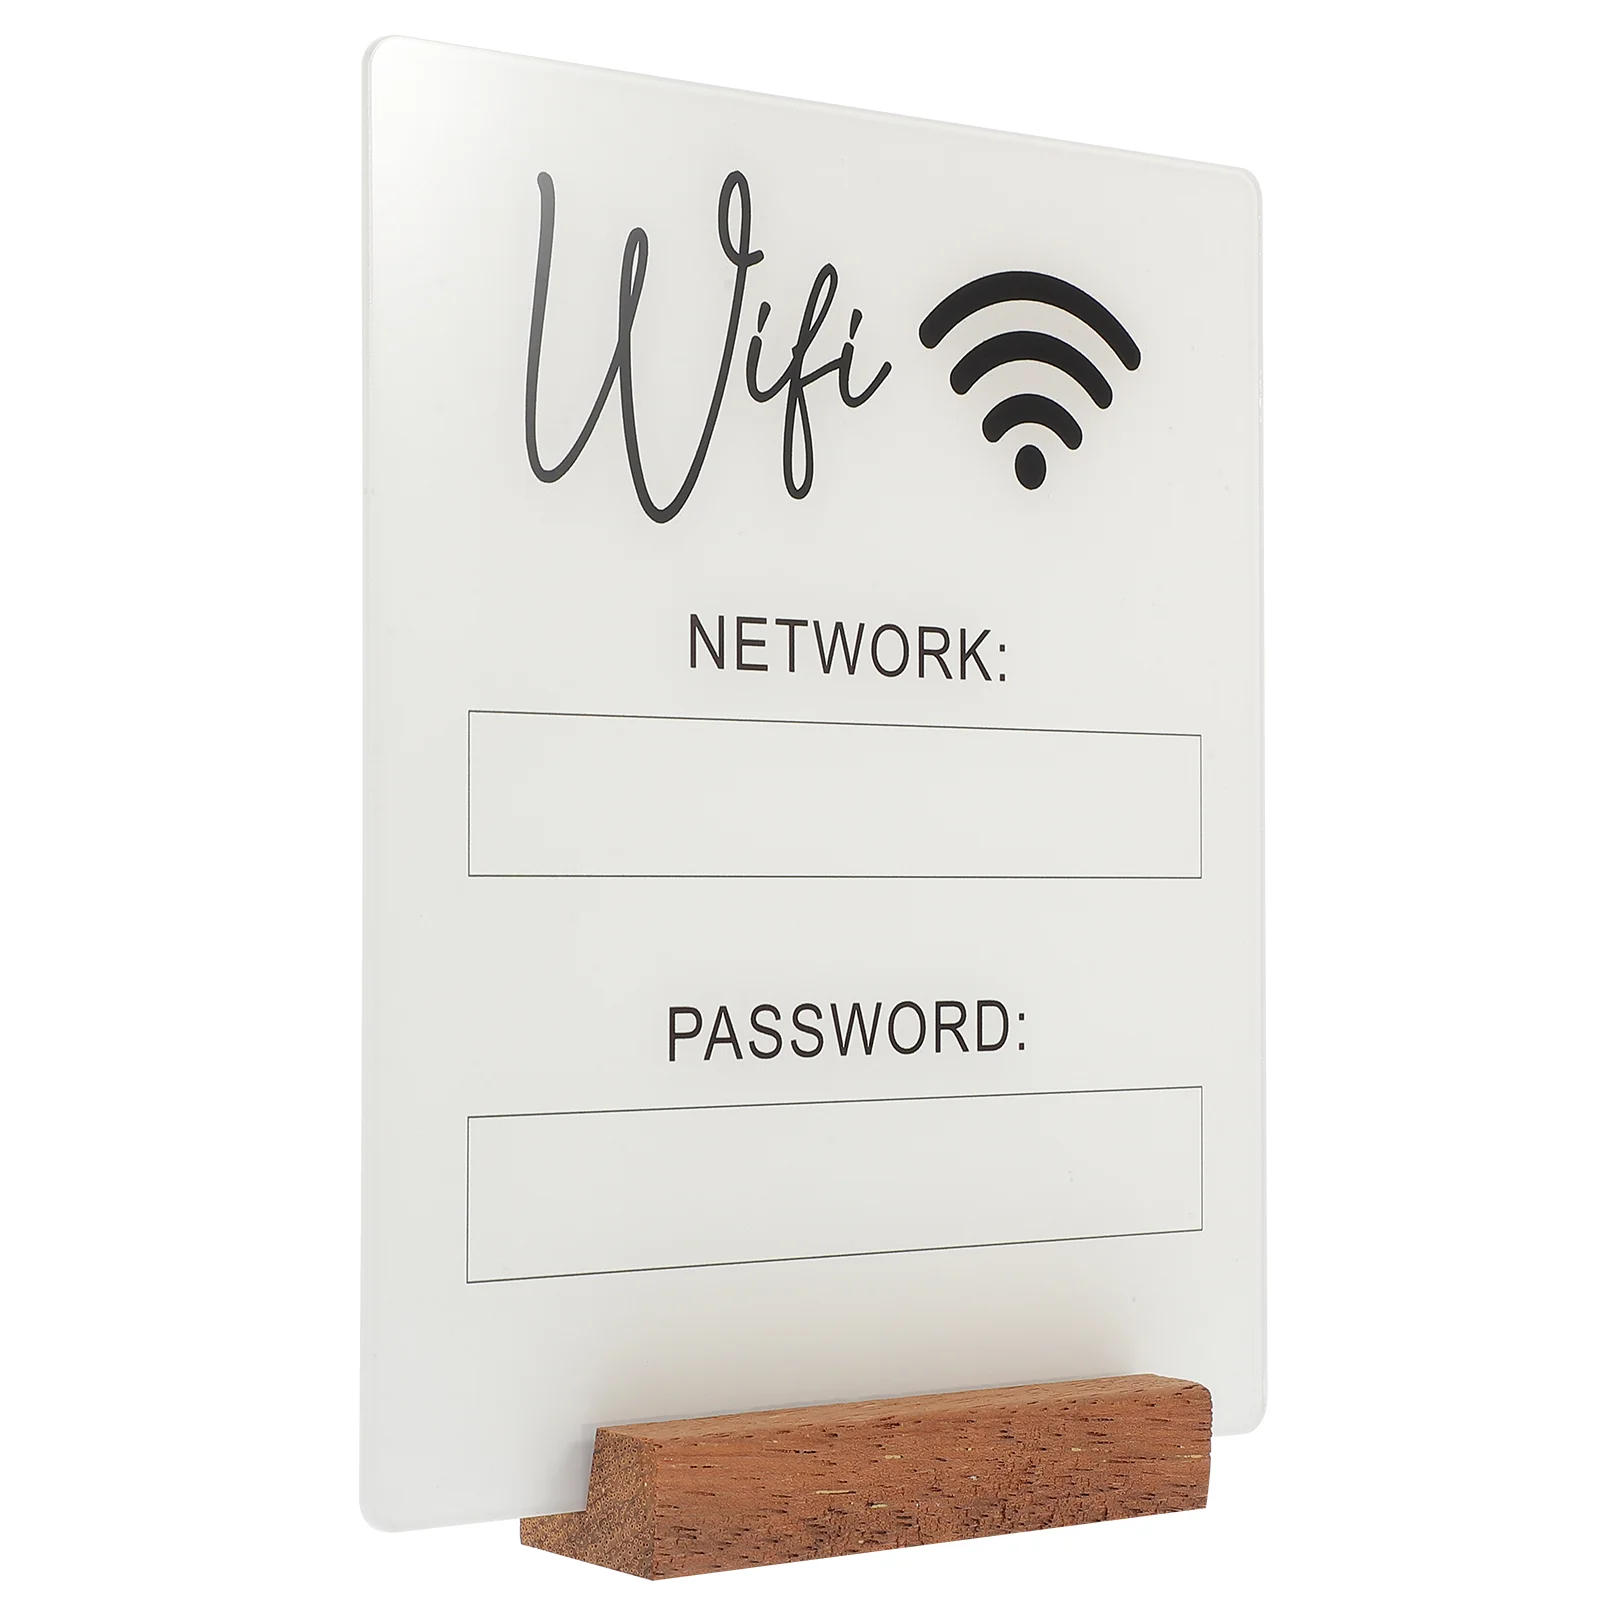 Wifi Password Sign Acrylic Reminder for Guest Room Desk Hotel Guests Stand Office Decor japan anime jujutsu kaisen acrylic figure stand model plate desk decor cosplay xmas keychain stand sign men s gift stand sign